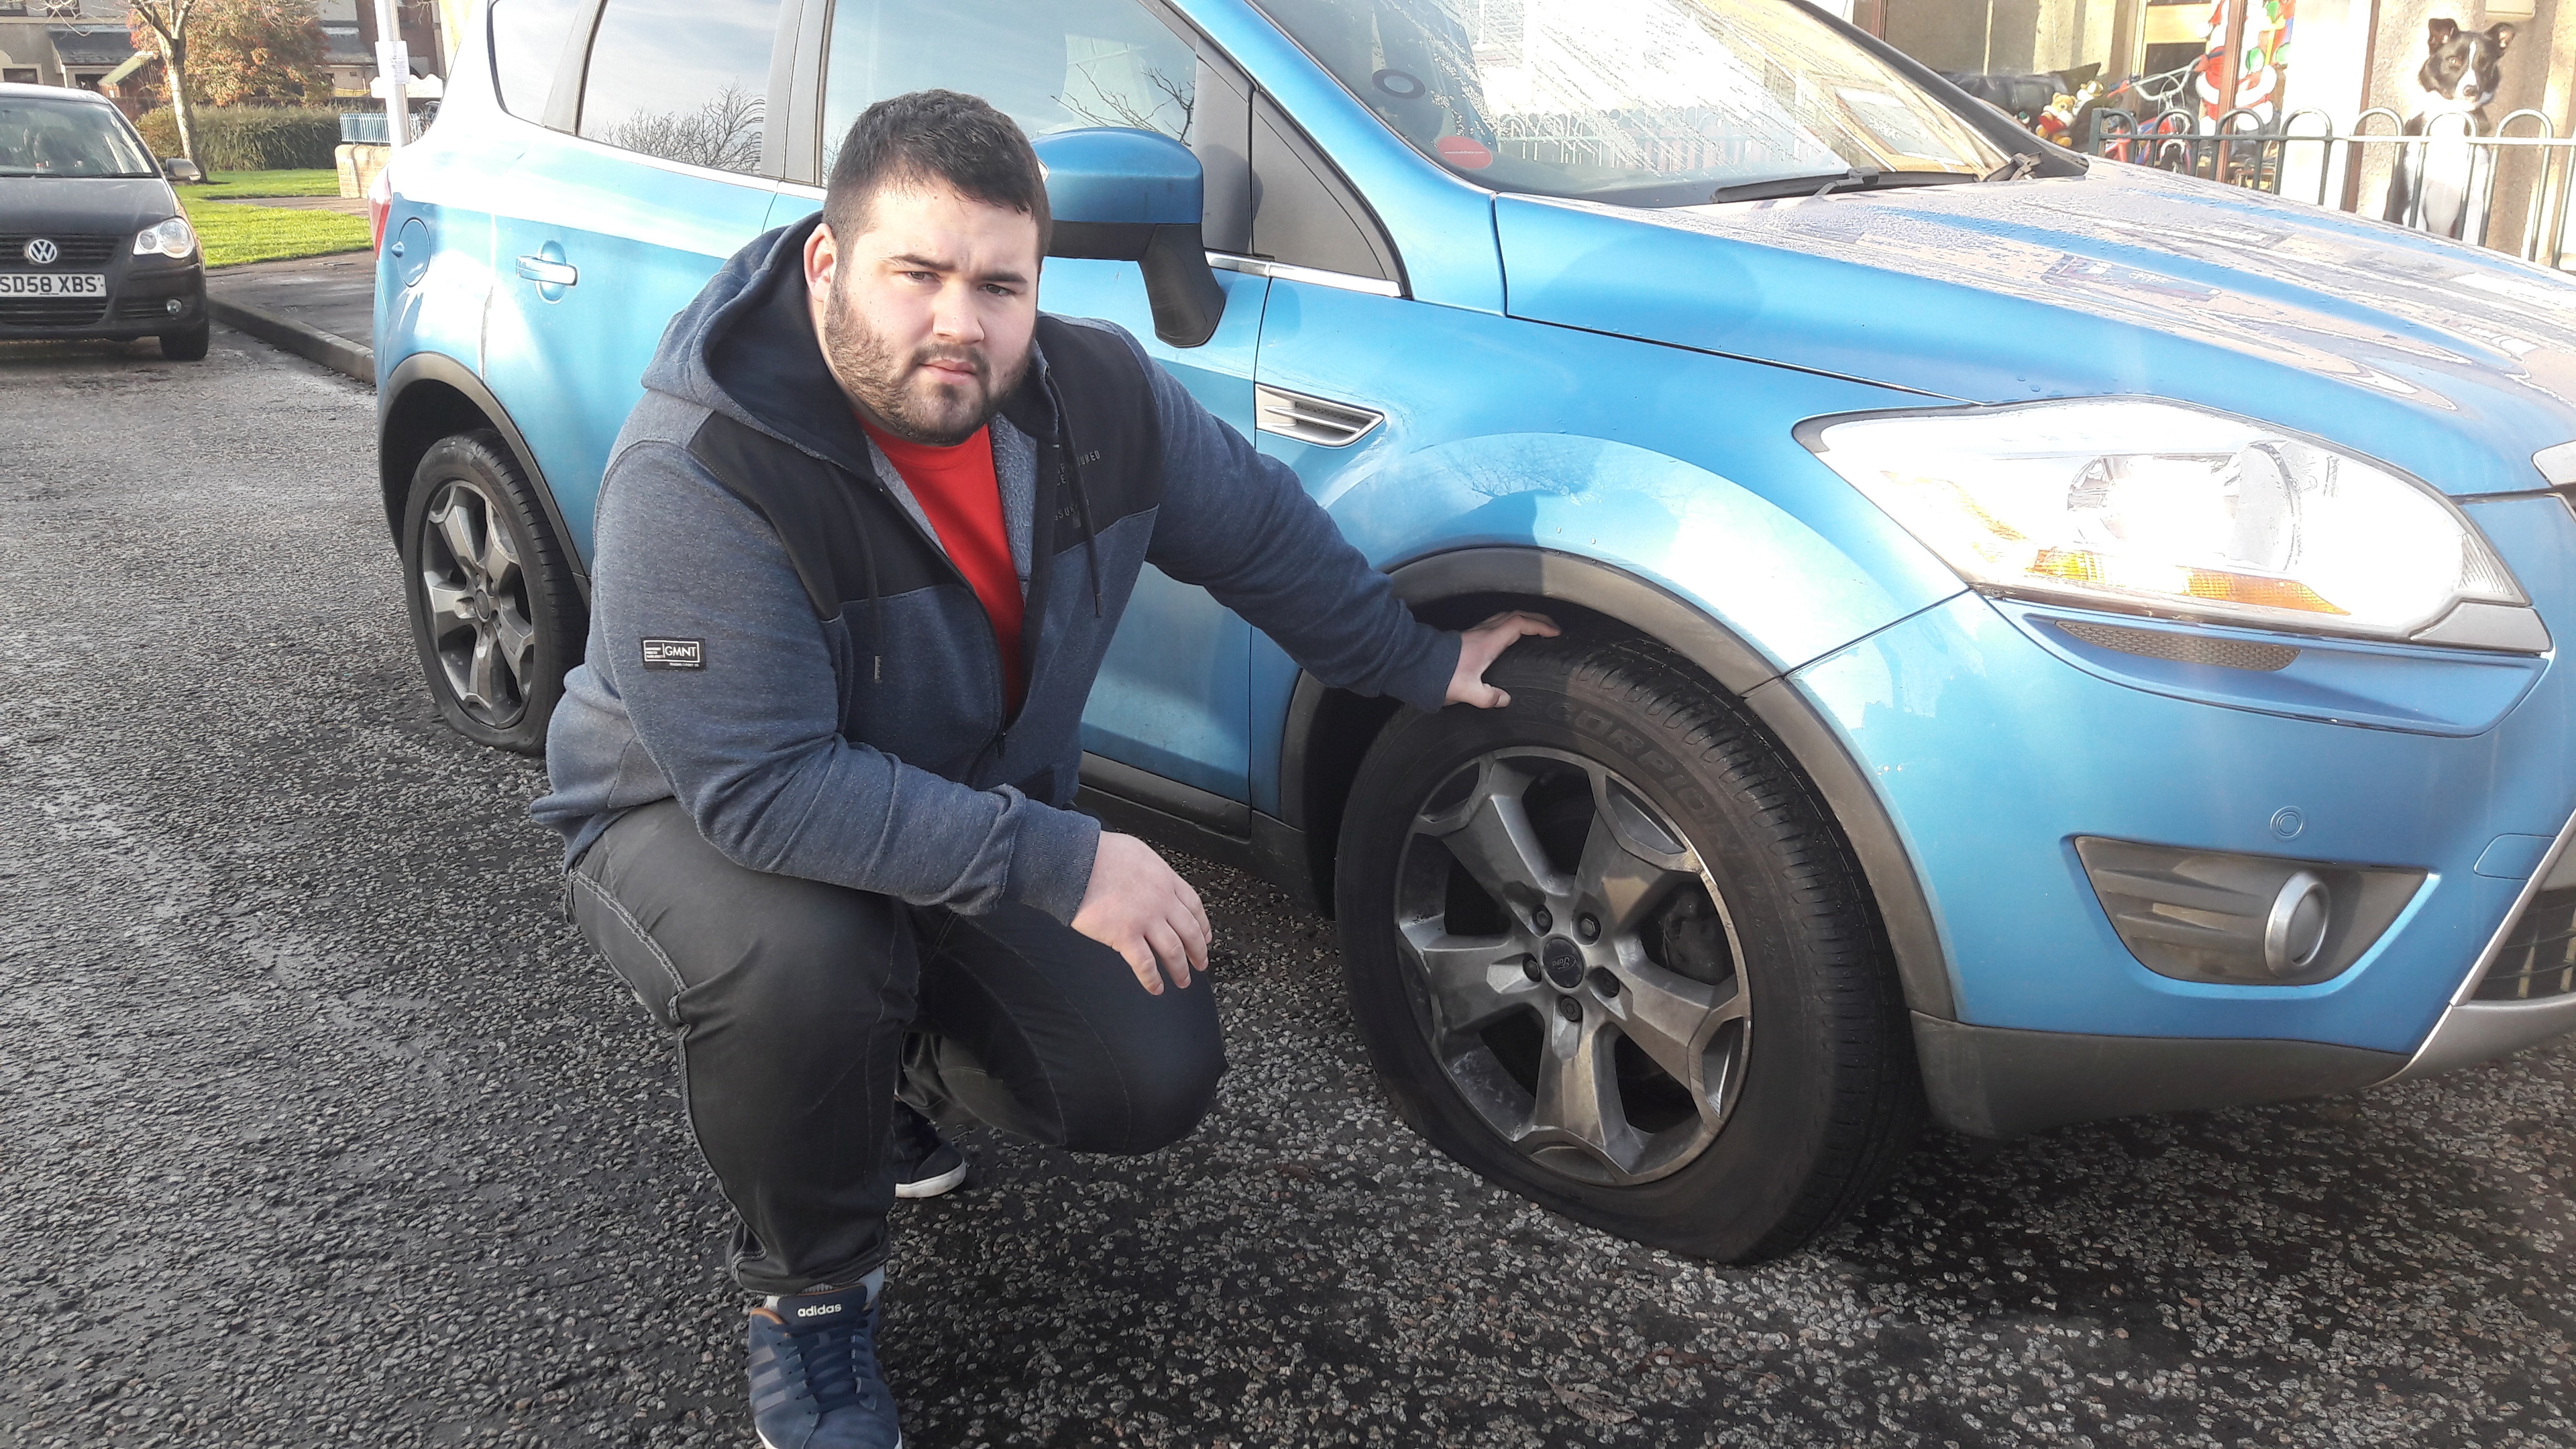 James Sadio had both offside tyres on his Ford damaged.